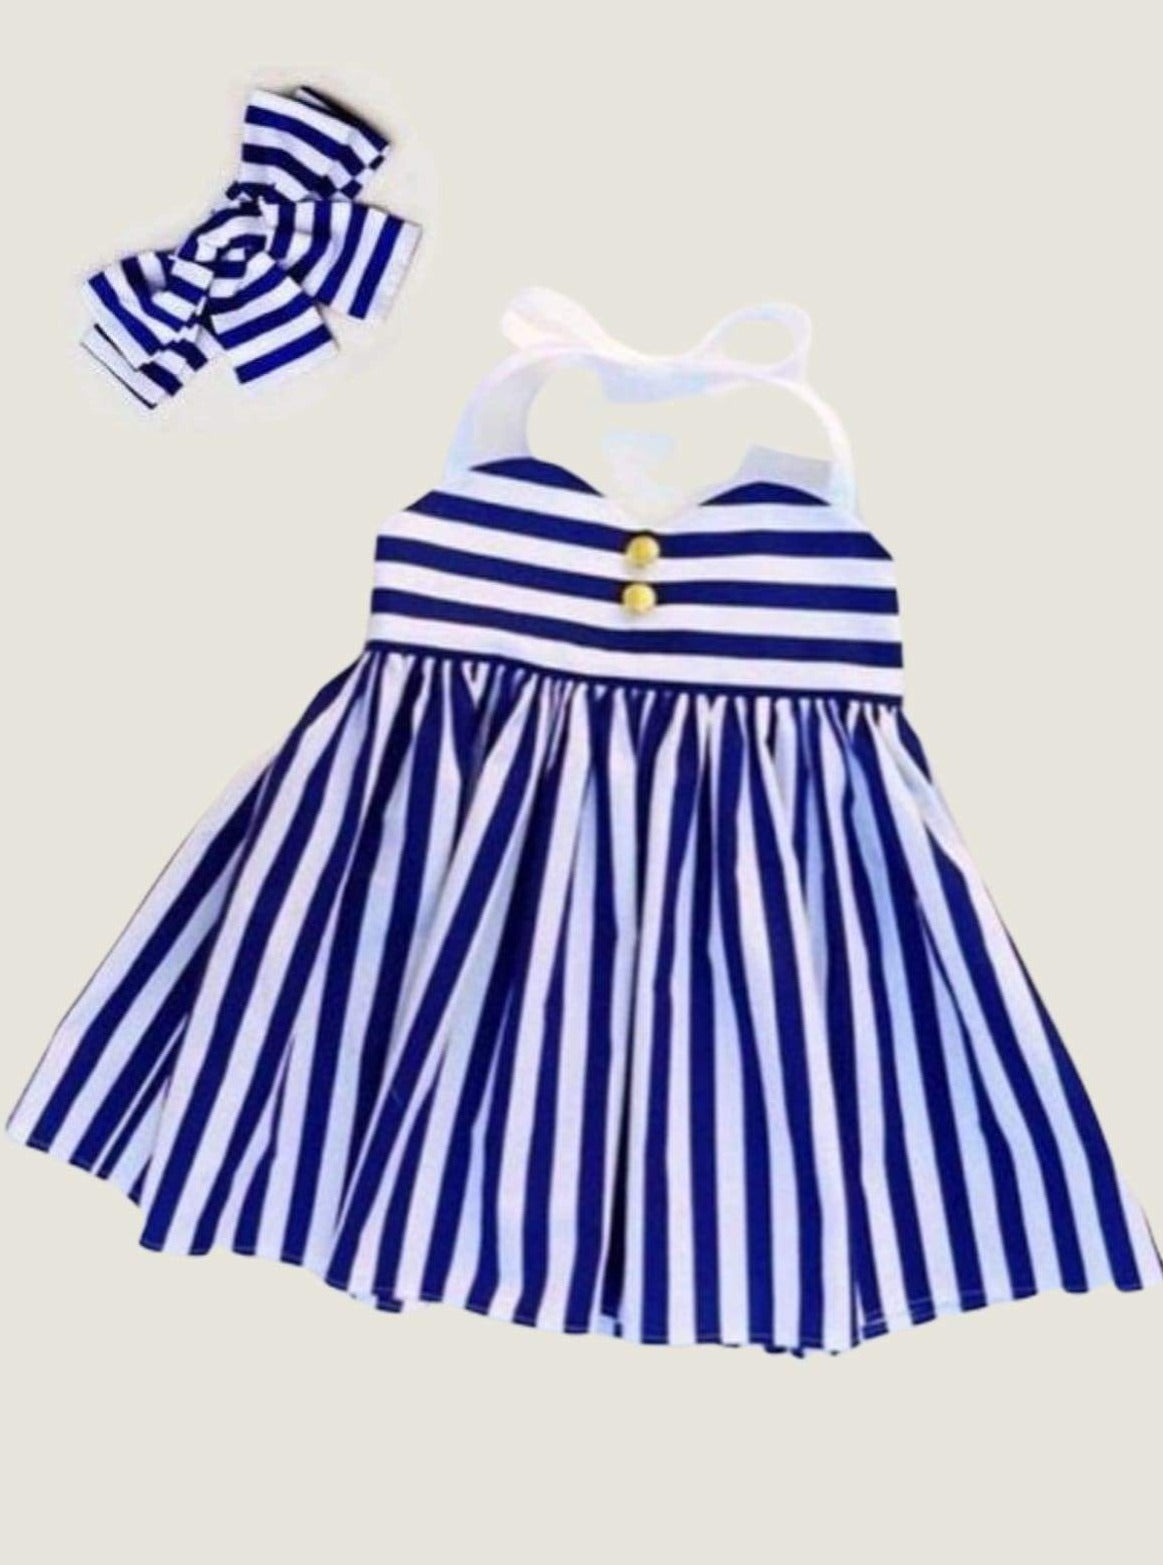 Girls Royal Striped Halter Dress with Bow - Girls Spring Casual Dress